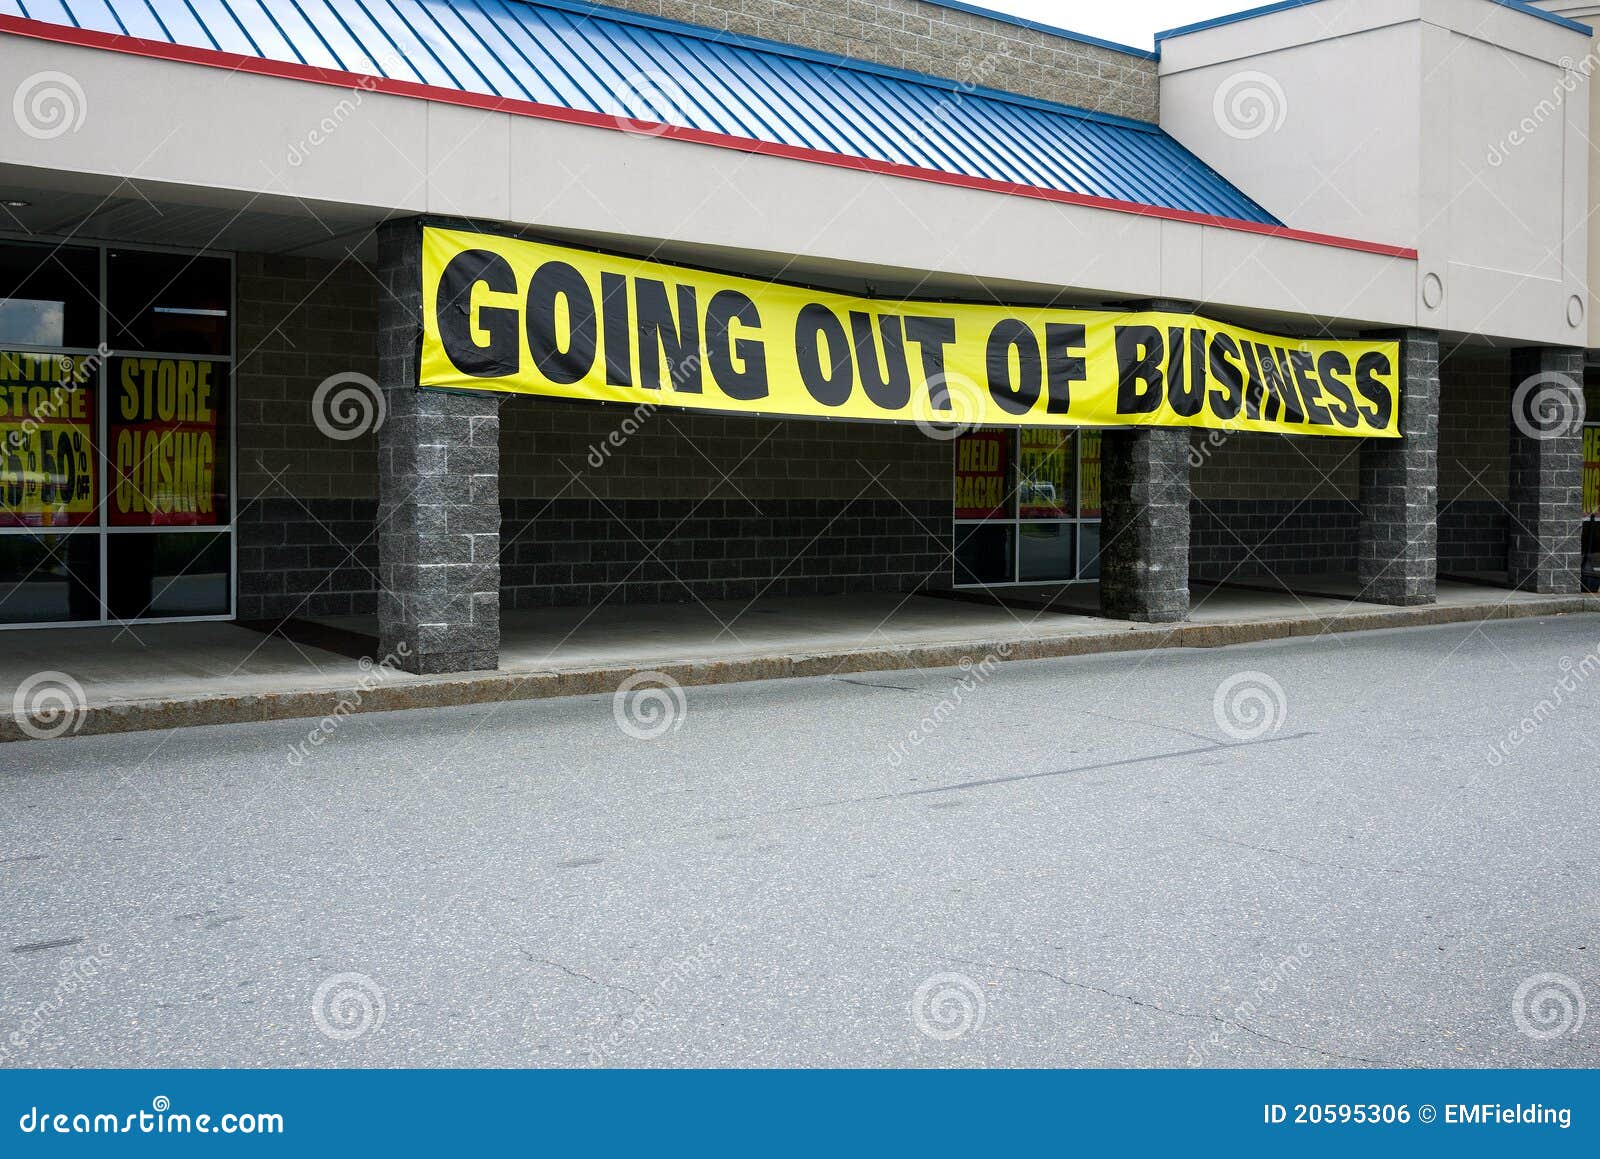 Going Out of Business stock photo. Image of business 20595306